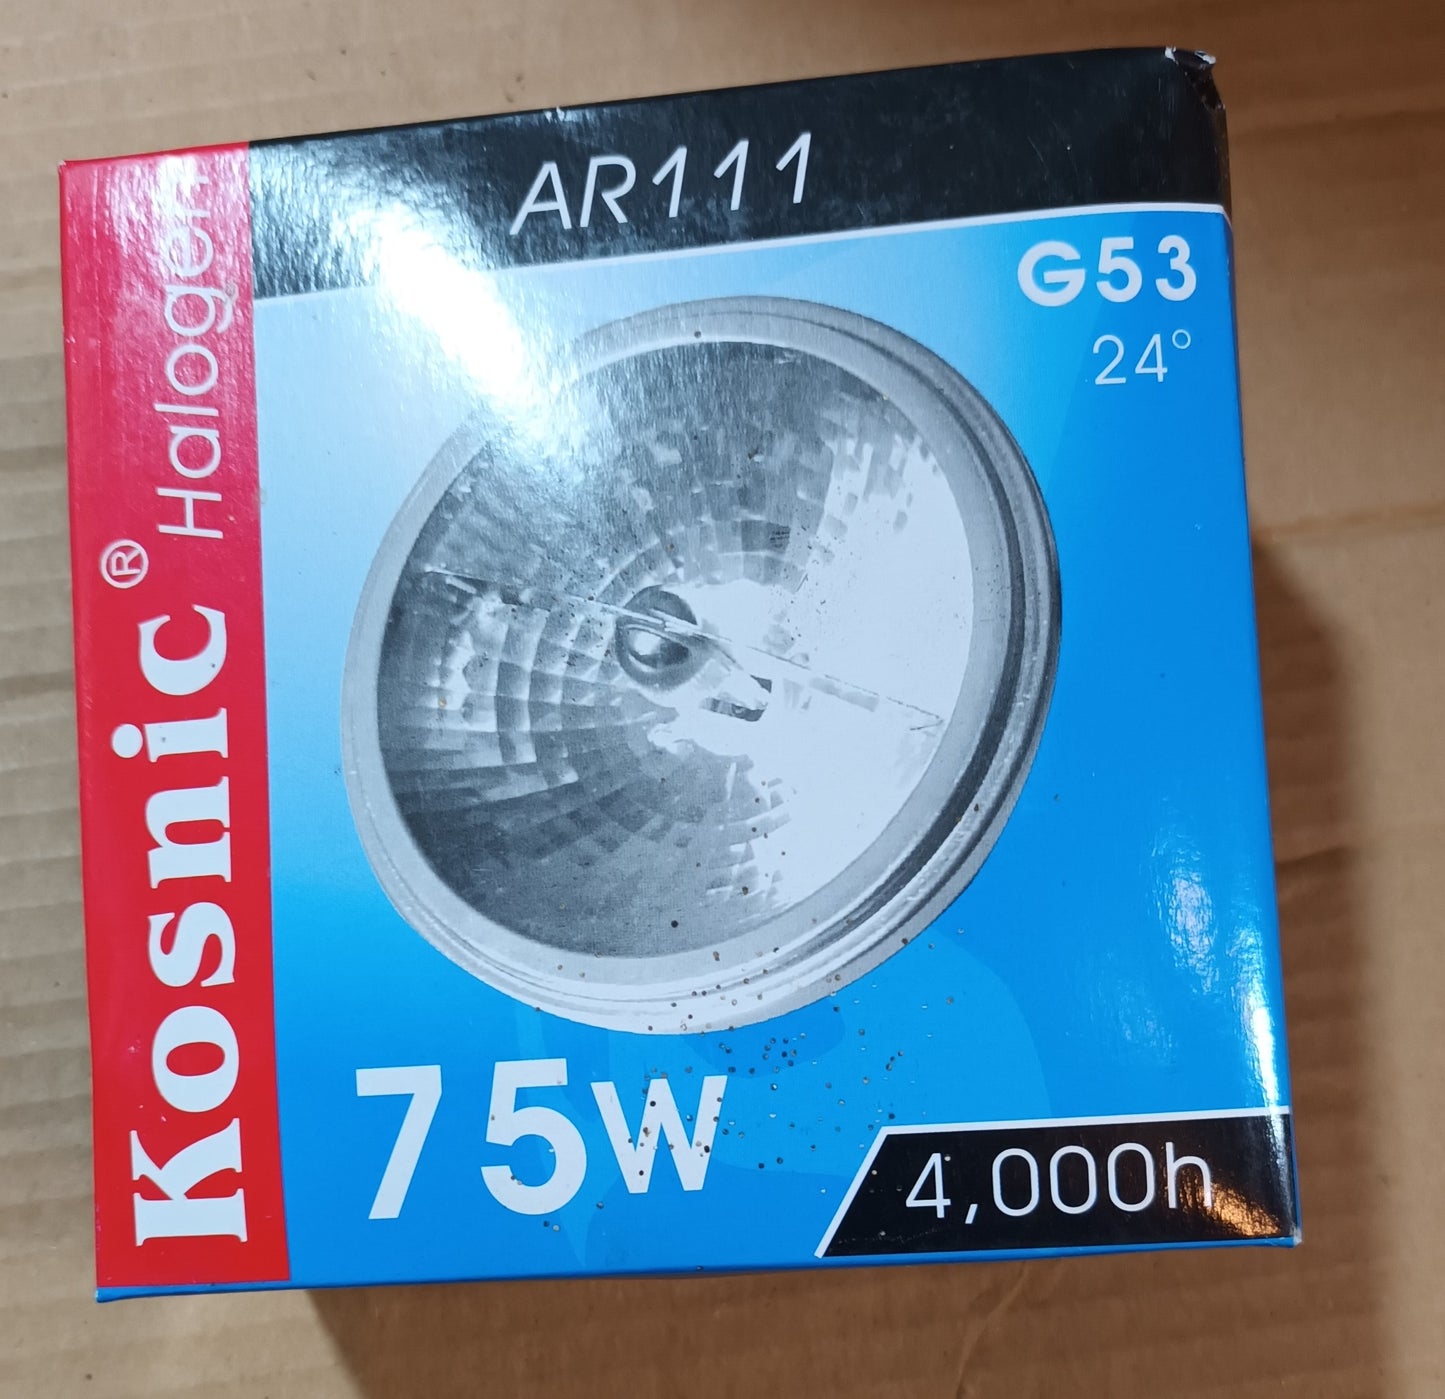 Ar111 75w Halogen Dimmable long life 4,000h by Kosnic